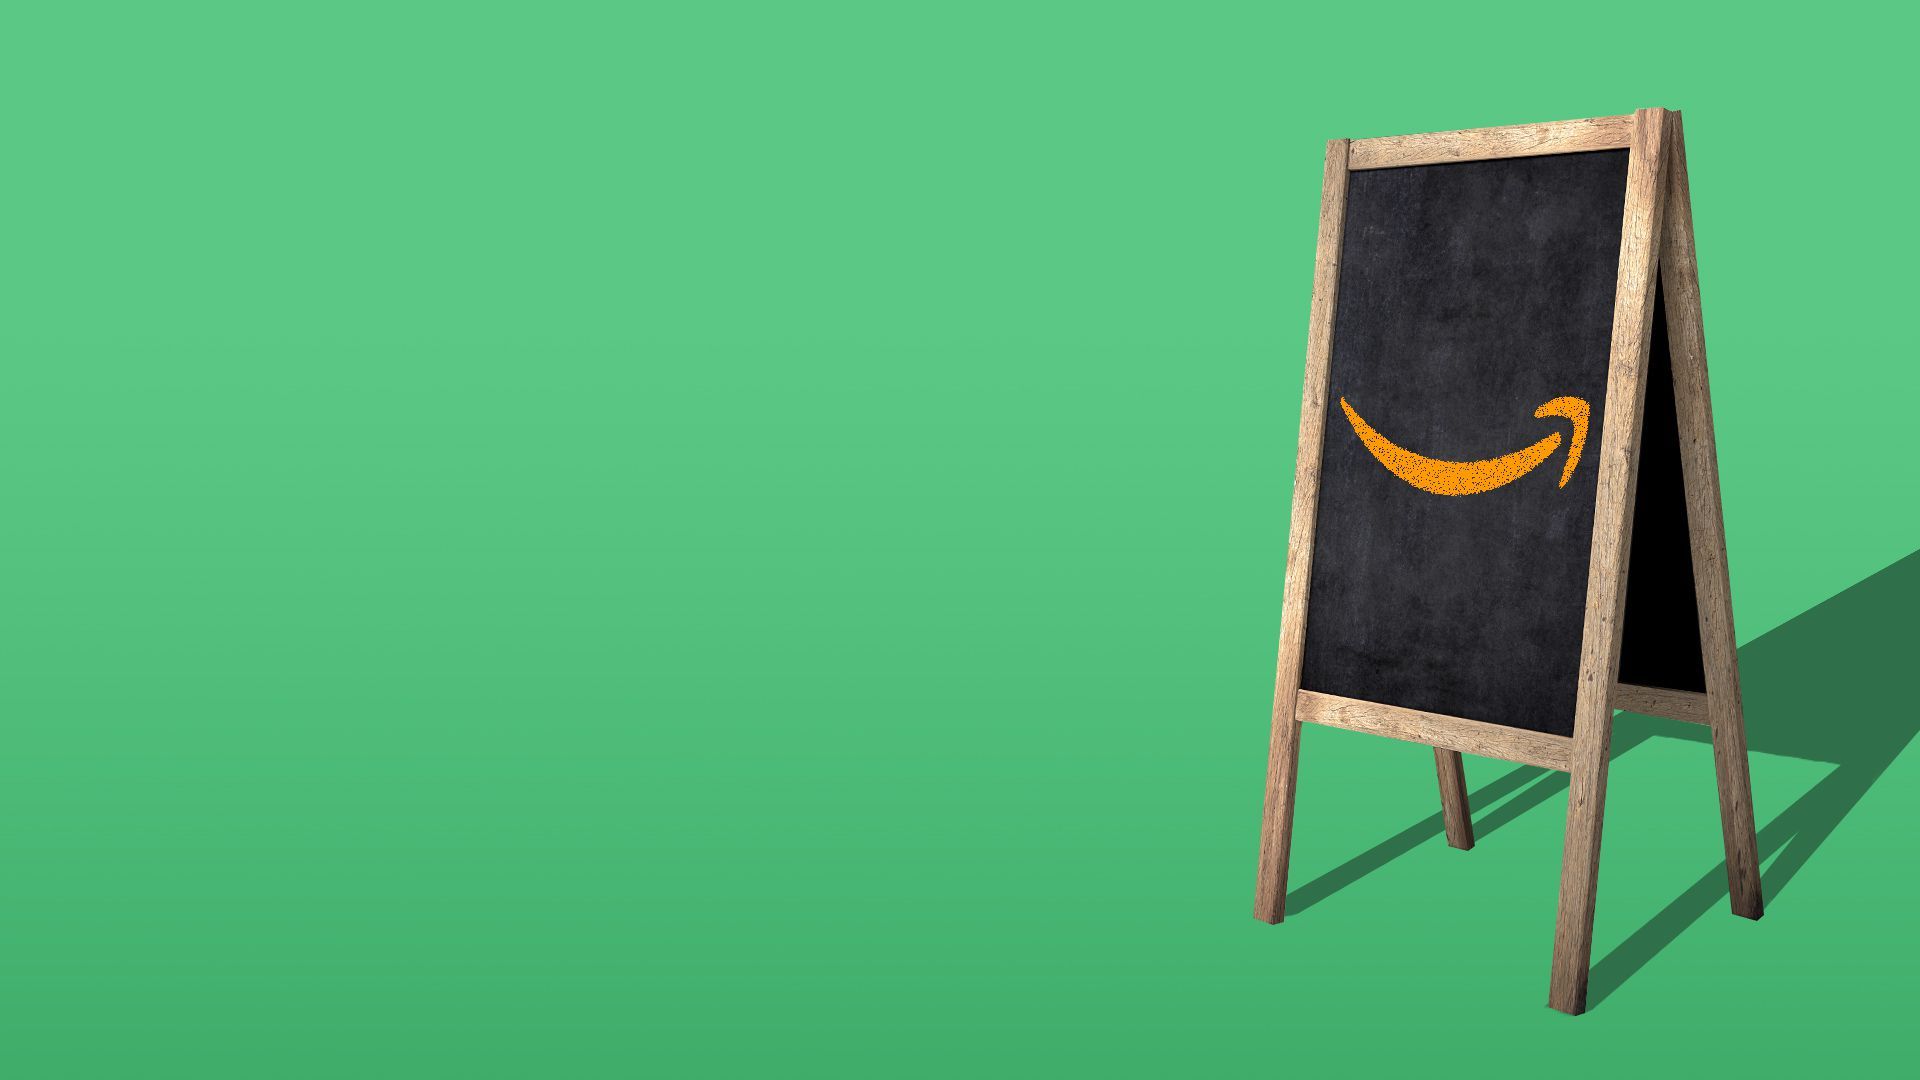 Illustration of a foldable chalkboard with the Amazon smile logo. 